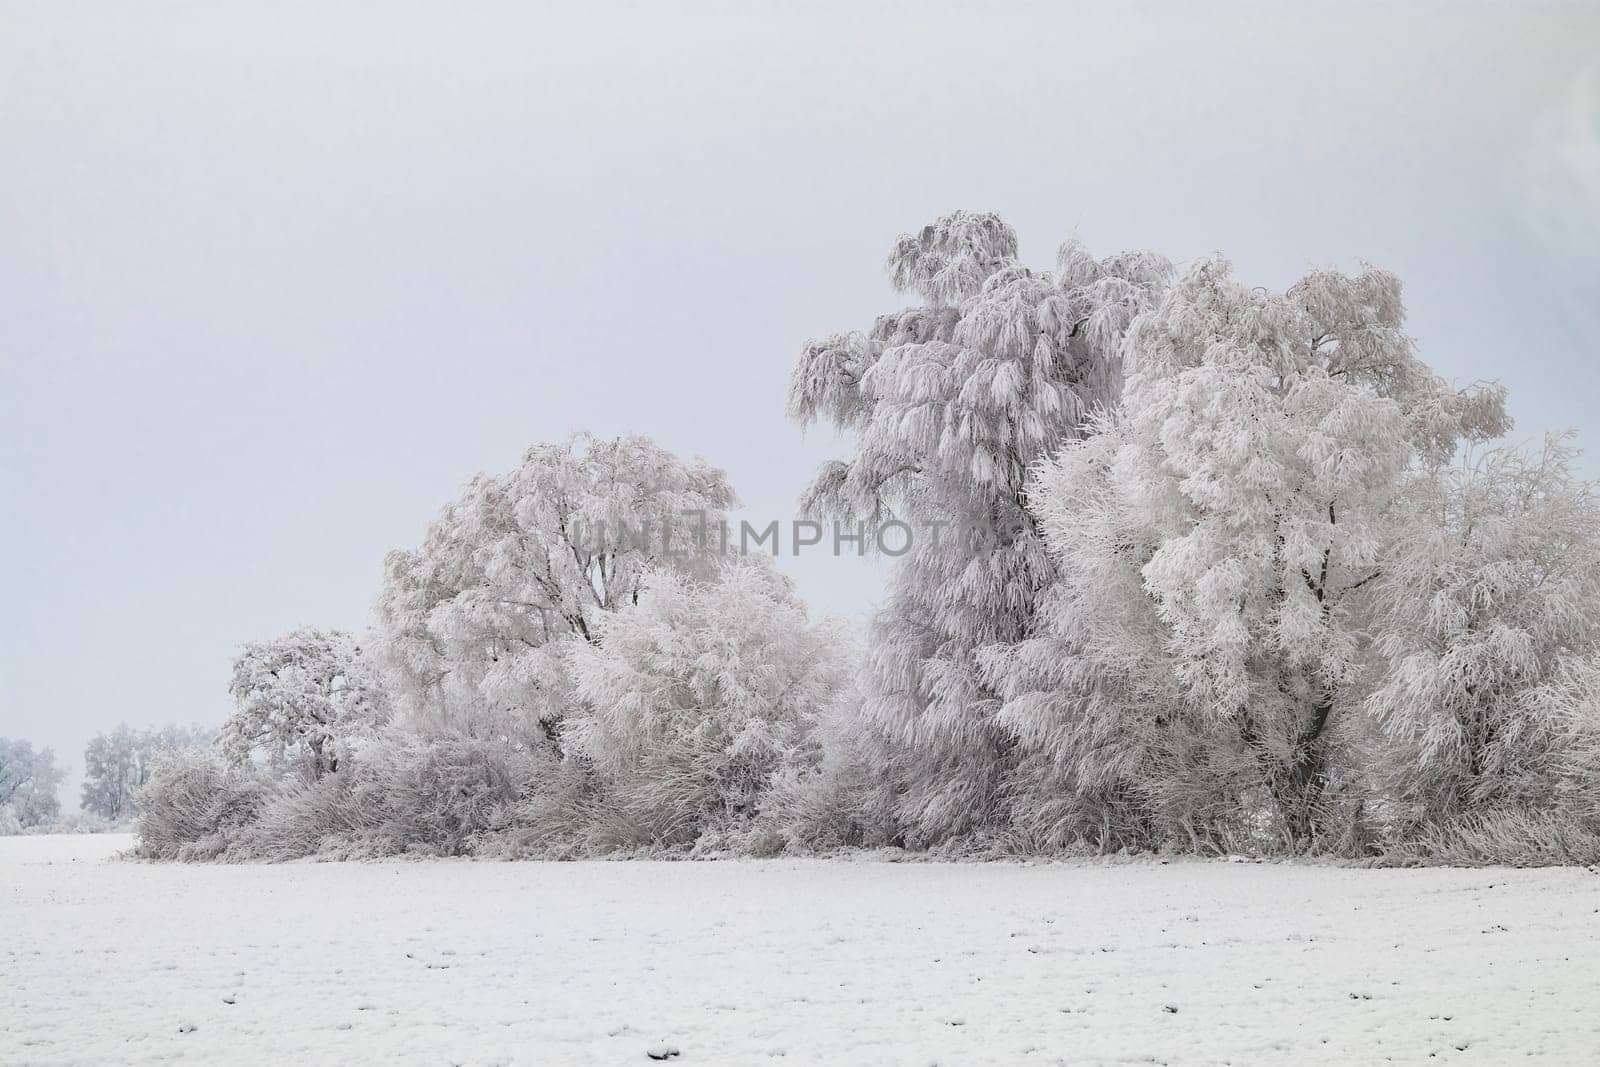 Icy bushes and trees behind a snowy field in winter with icy cold in Germany